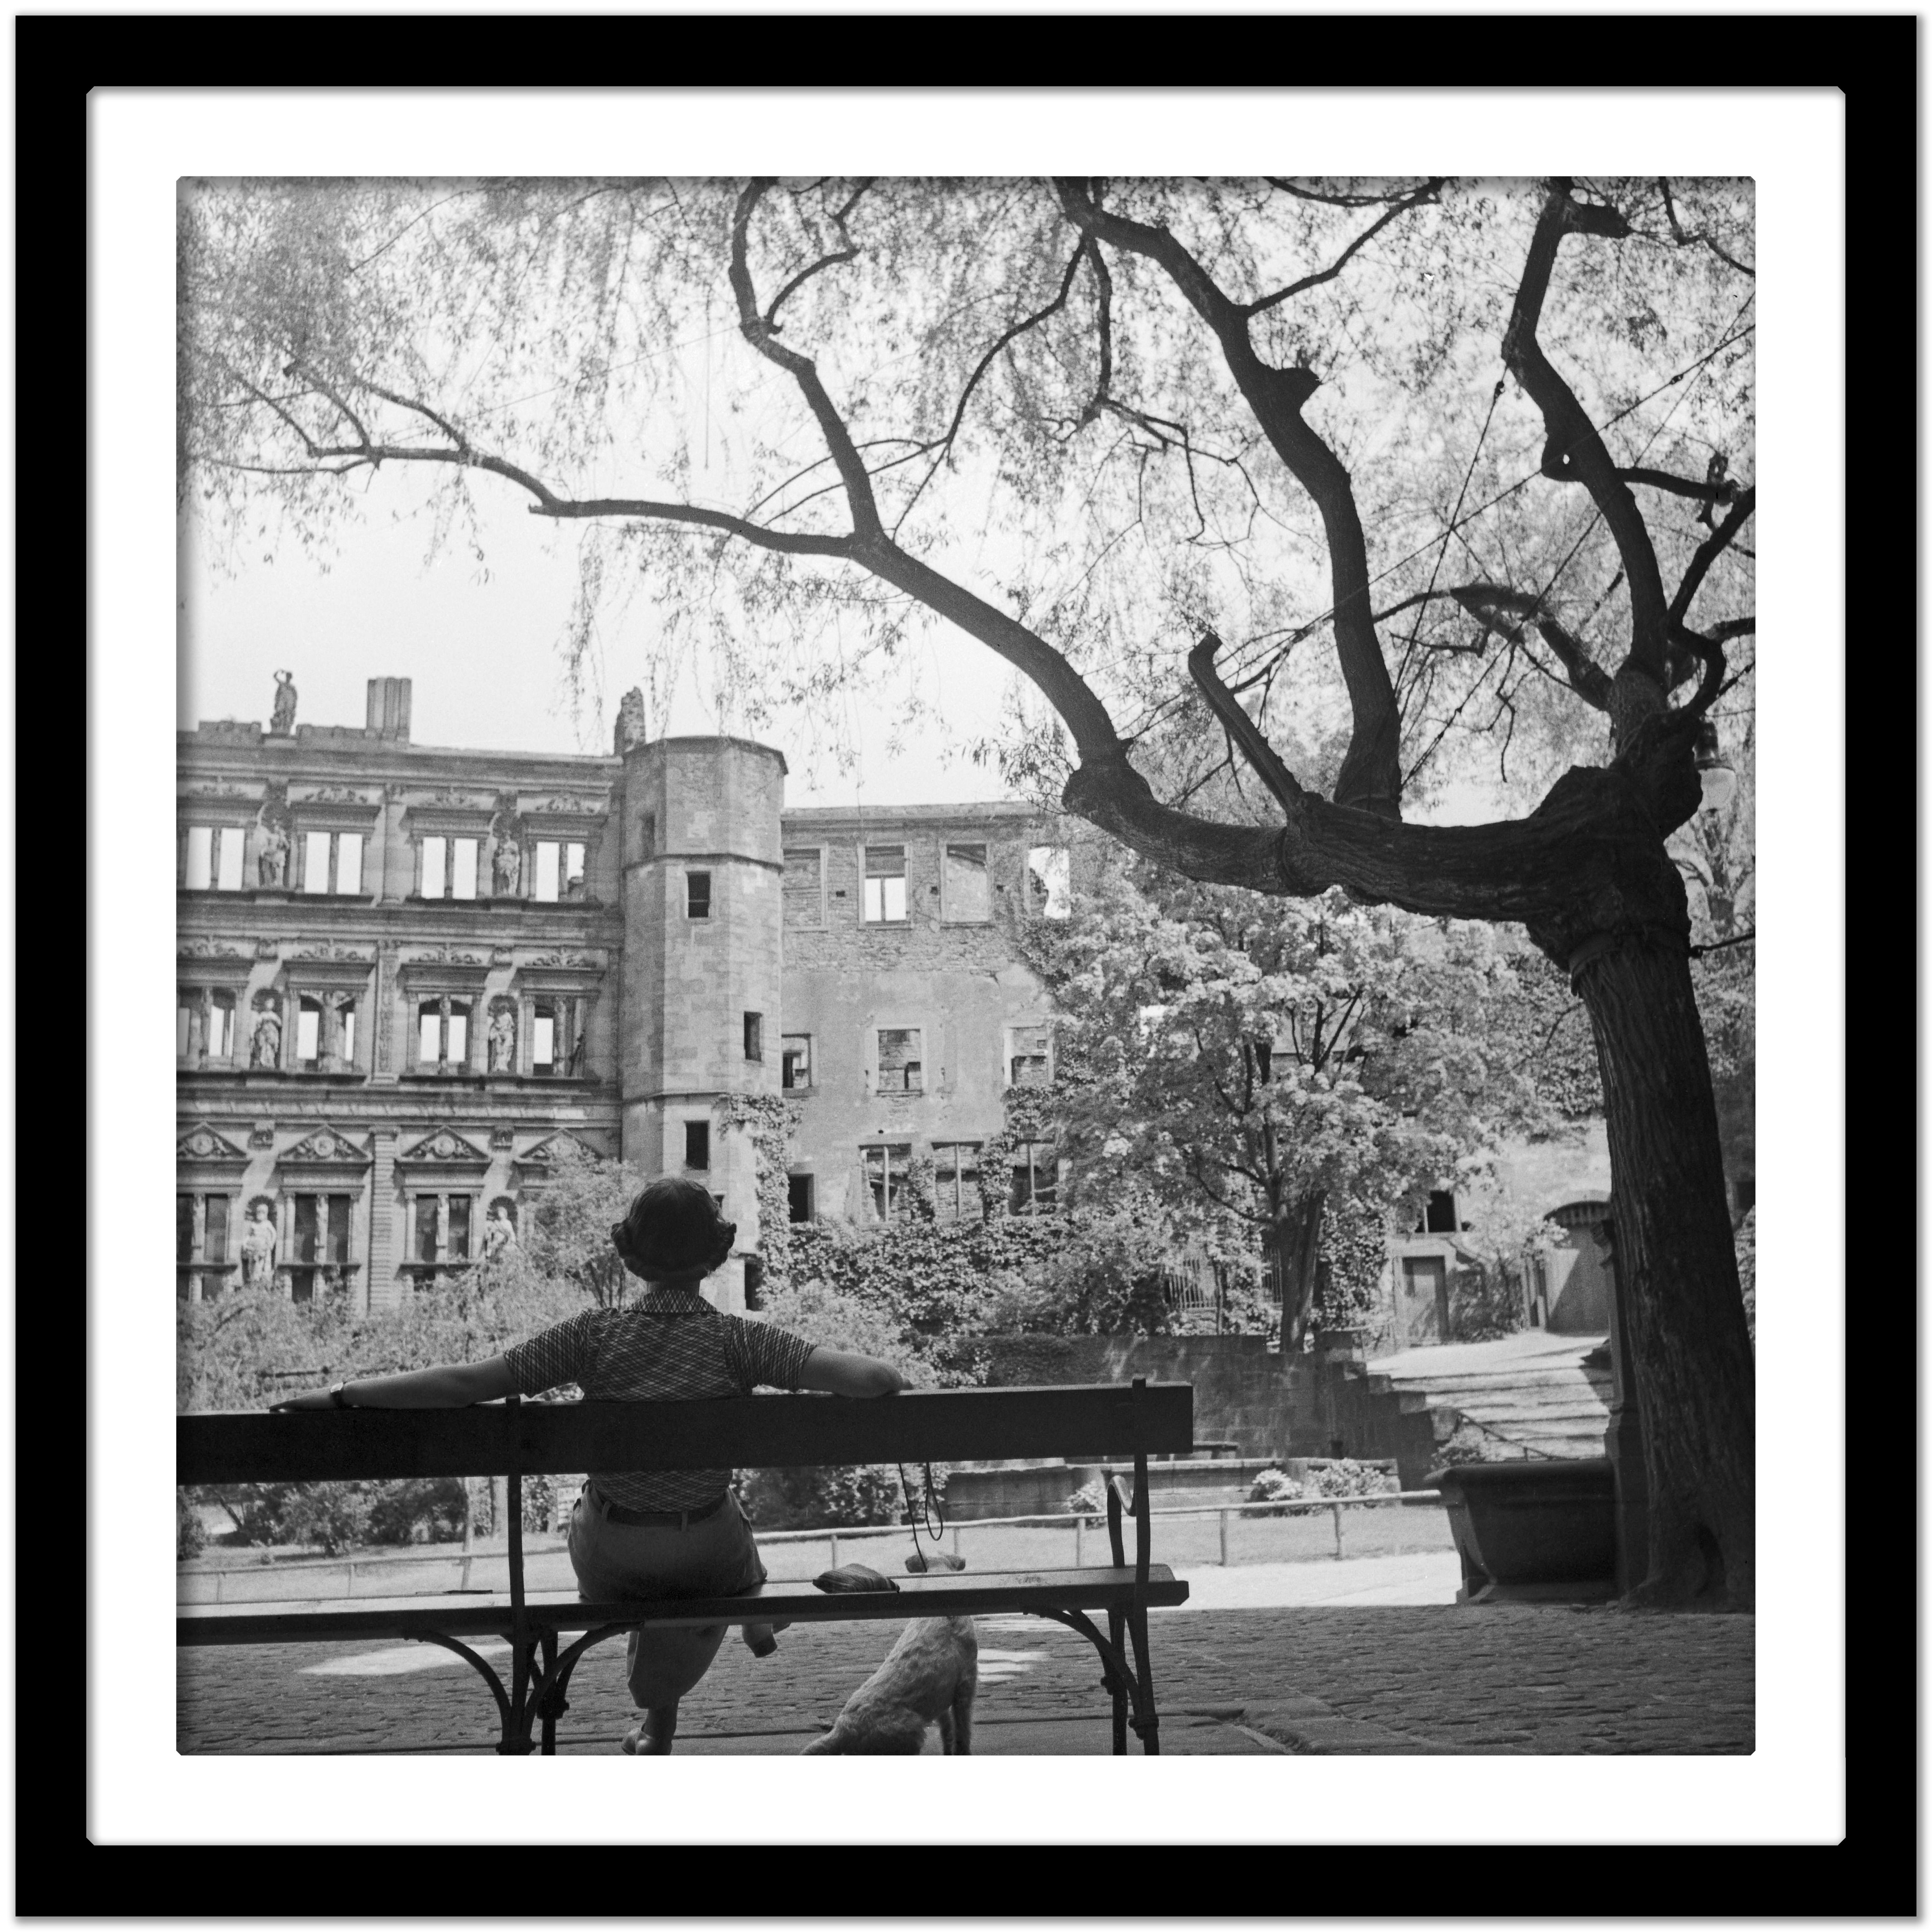 Woman on bench in front of Heidelberg castle, Germany 1936, Printed Later  - Gray Black and White Photograph by Karl Heinrich Lämmel